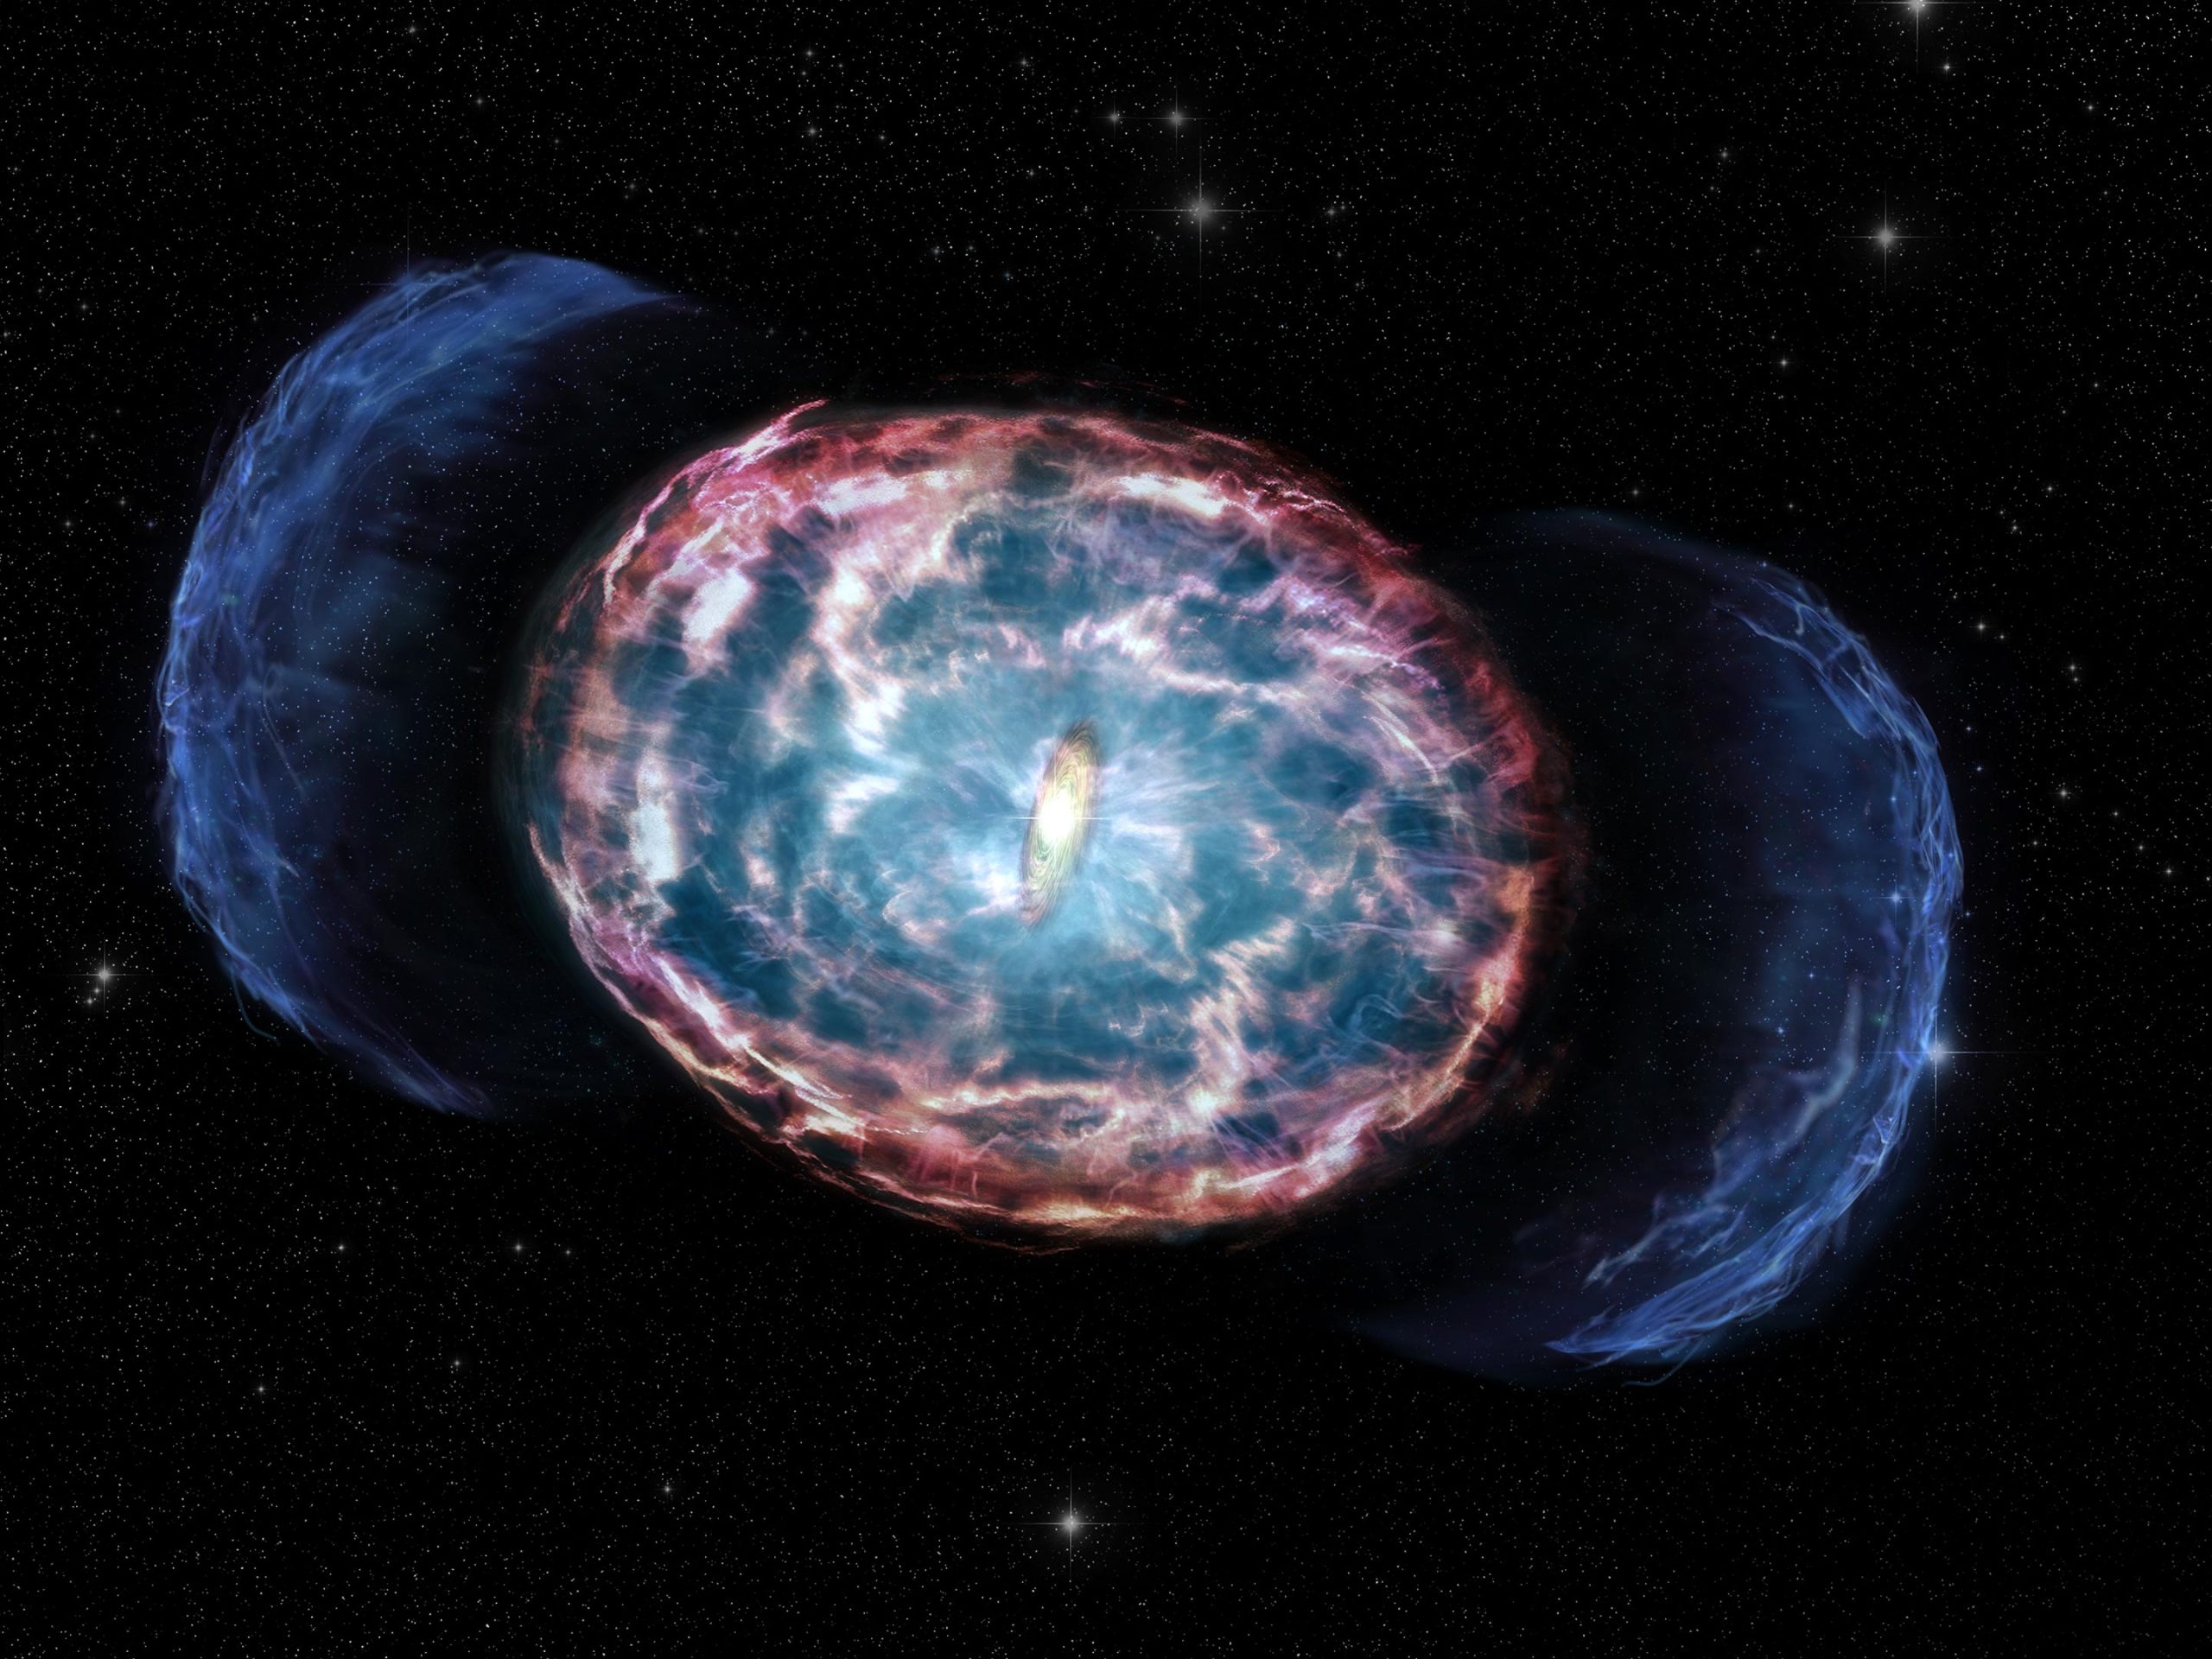 Kilonova’s radioactive glow suggests a rapid regression of the late spin of neutron stars into the black hole.